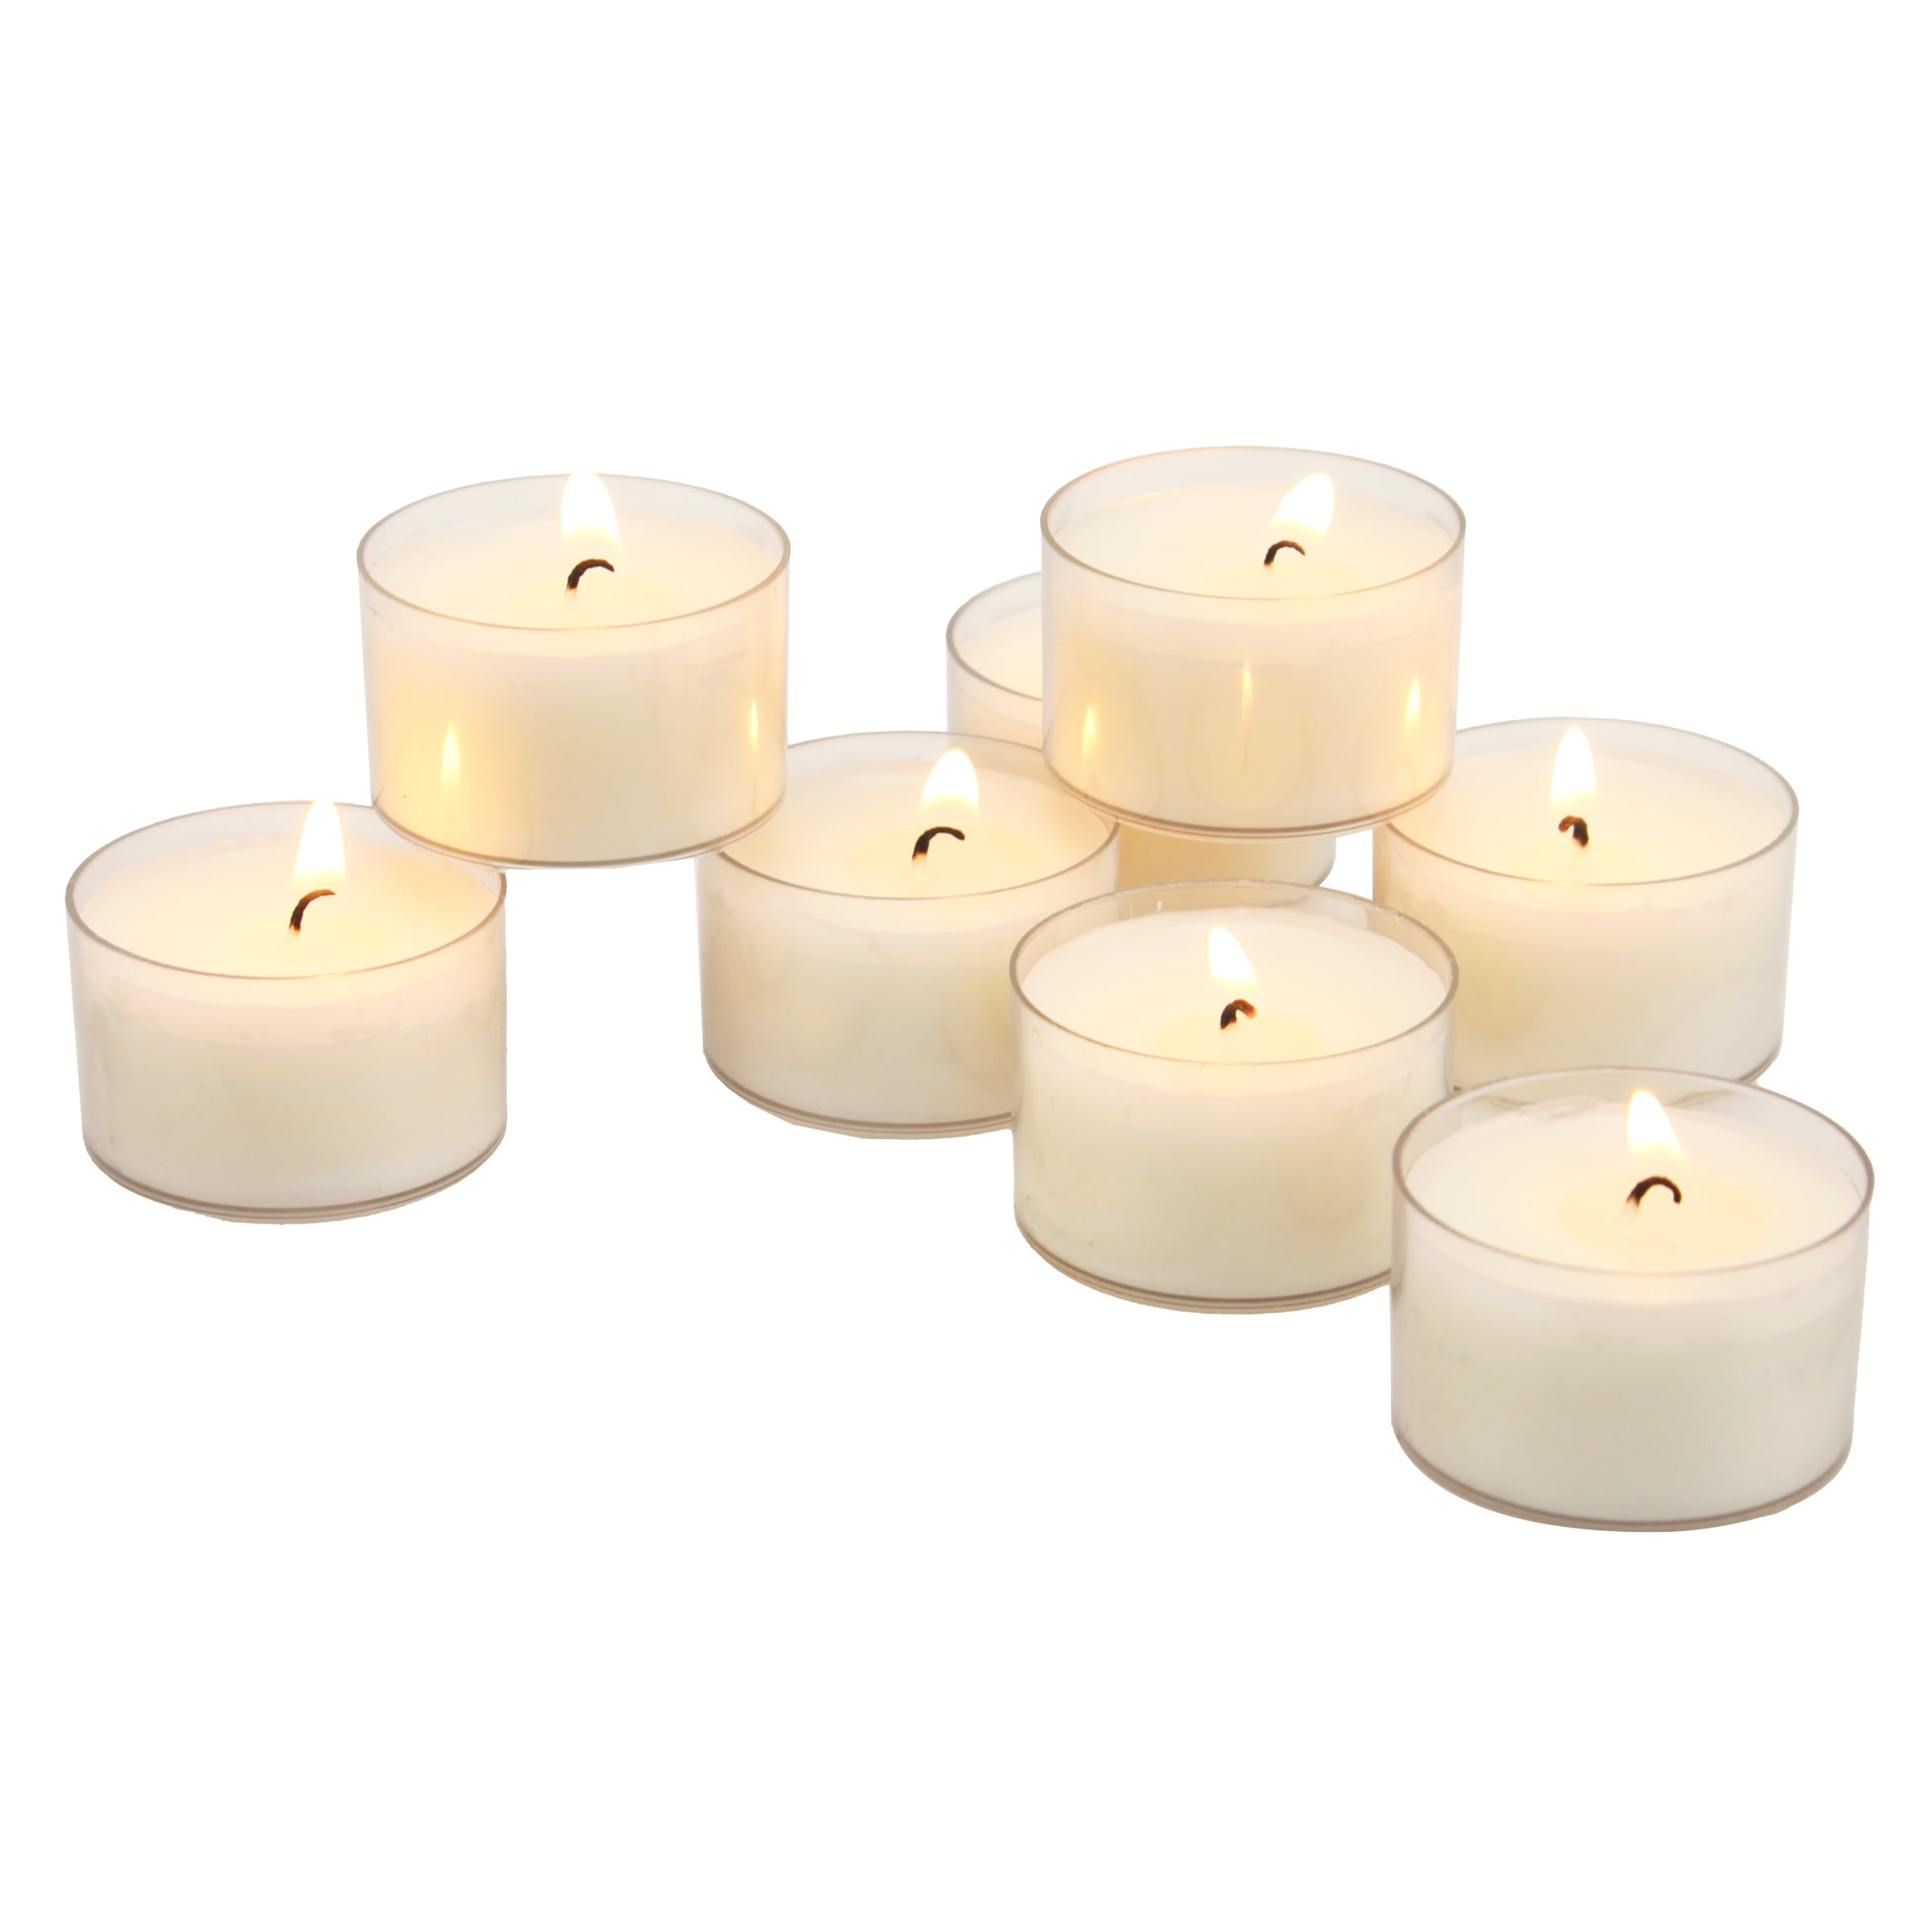 Jelly Belly Scented Tealights Candles Up To 4 Hours Burn Time Tea Lights 10 Pack 